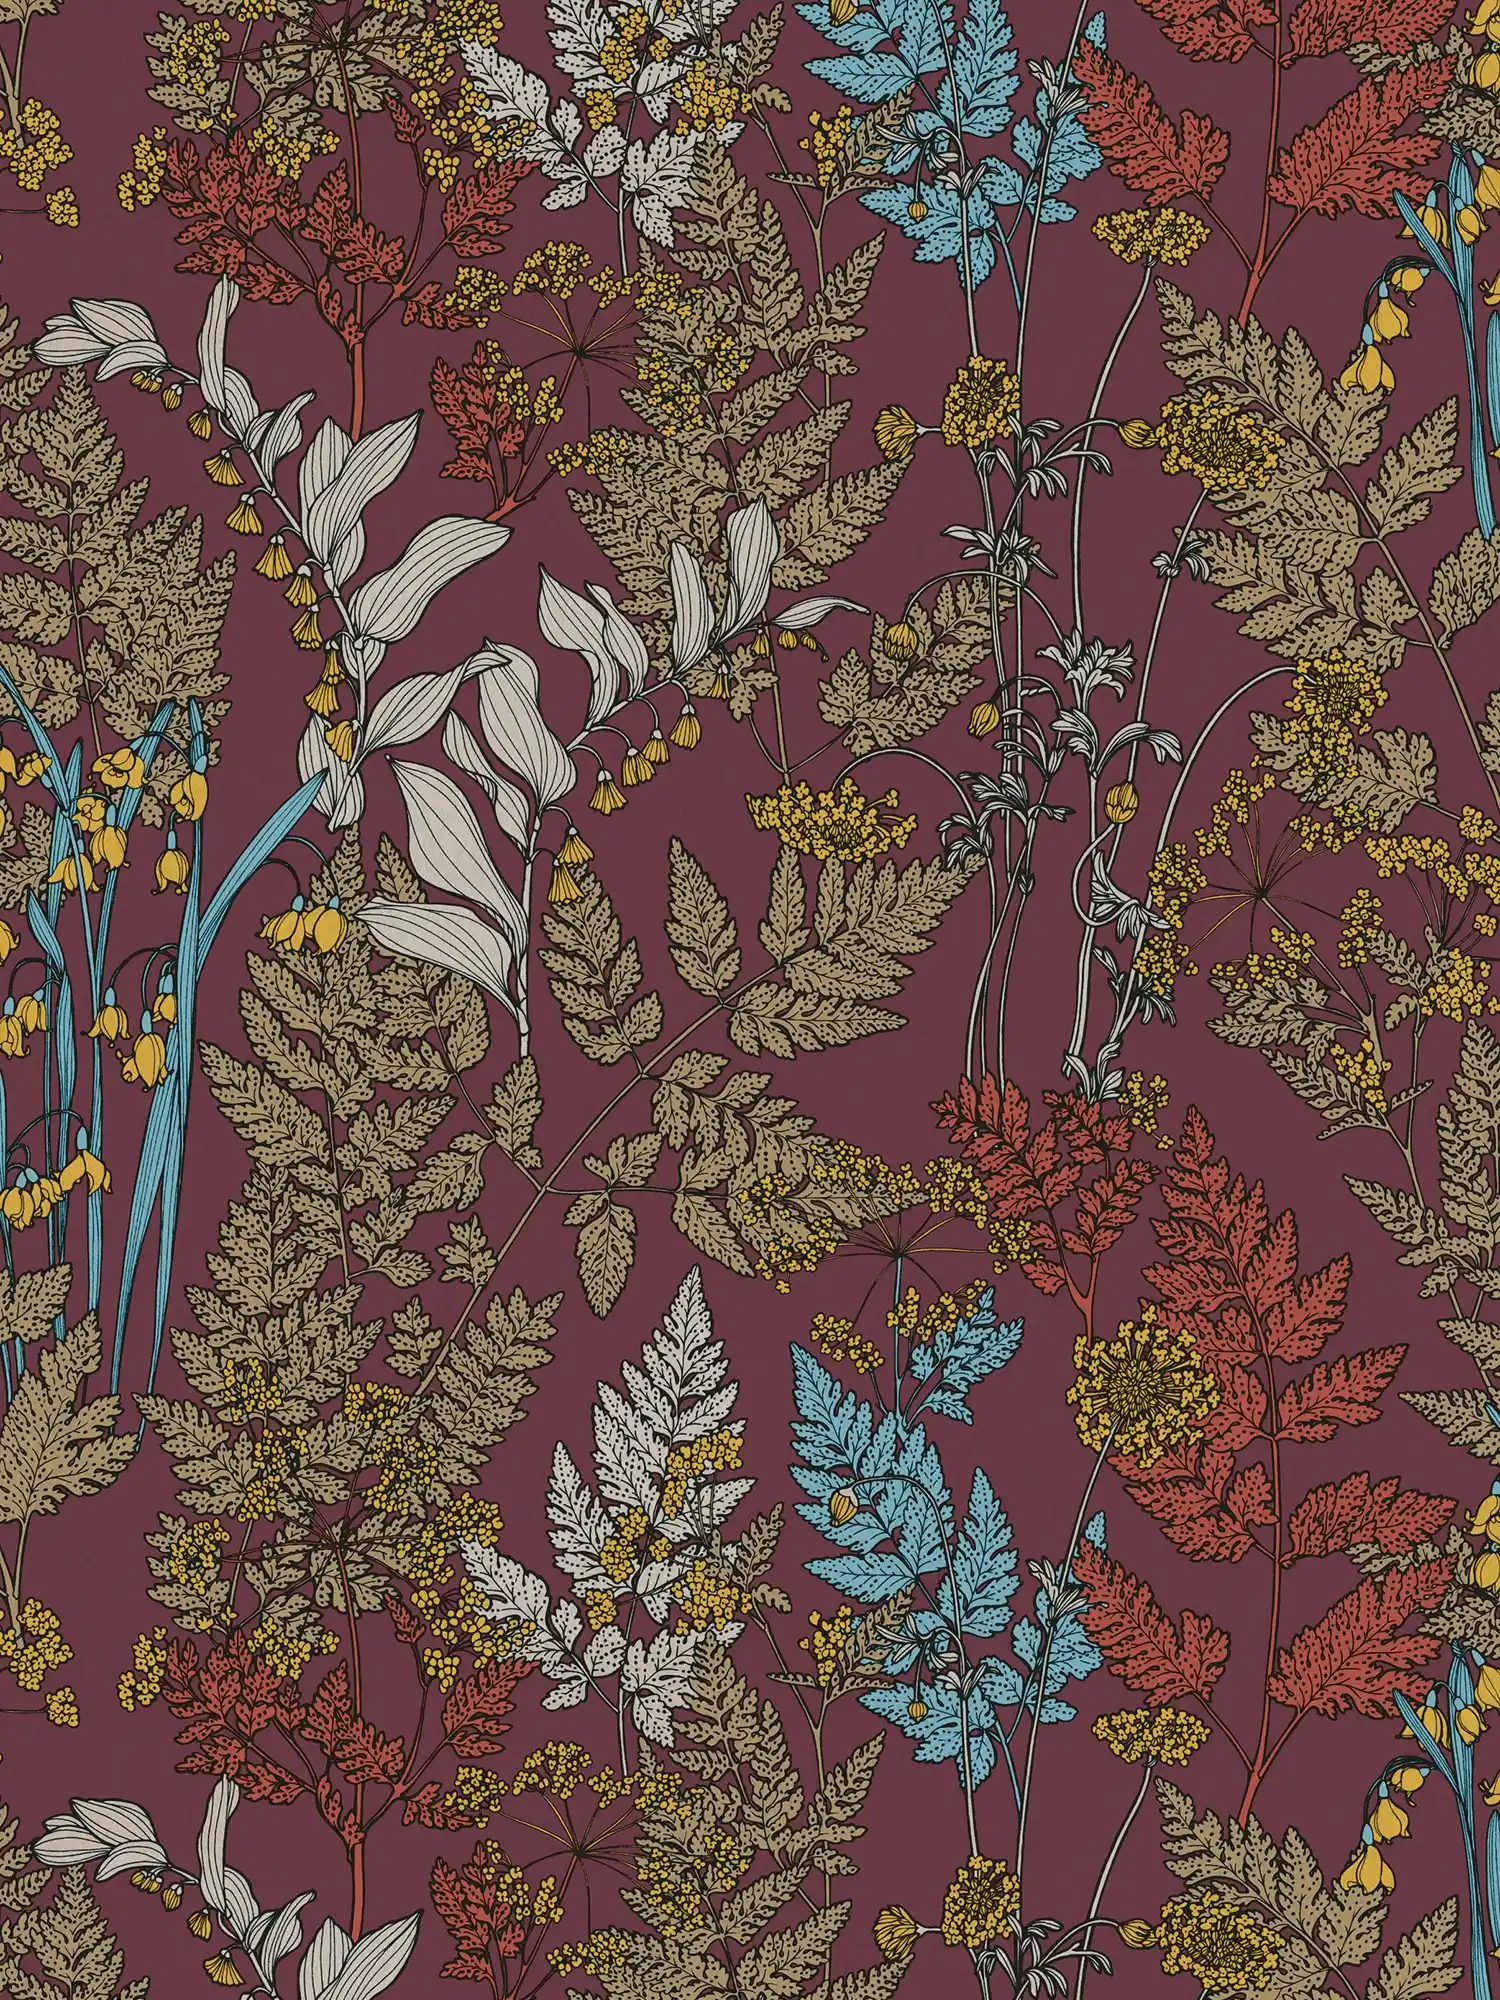 Purple wallpaper with colourful leaves & flowers design - red, yellow, blue
